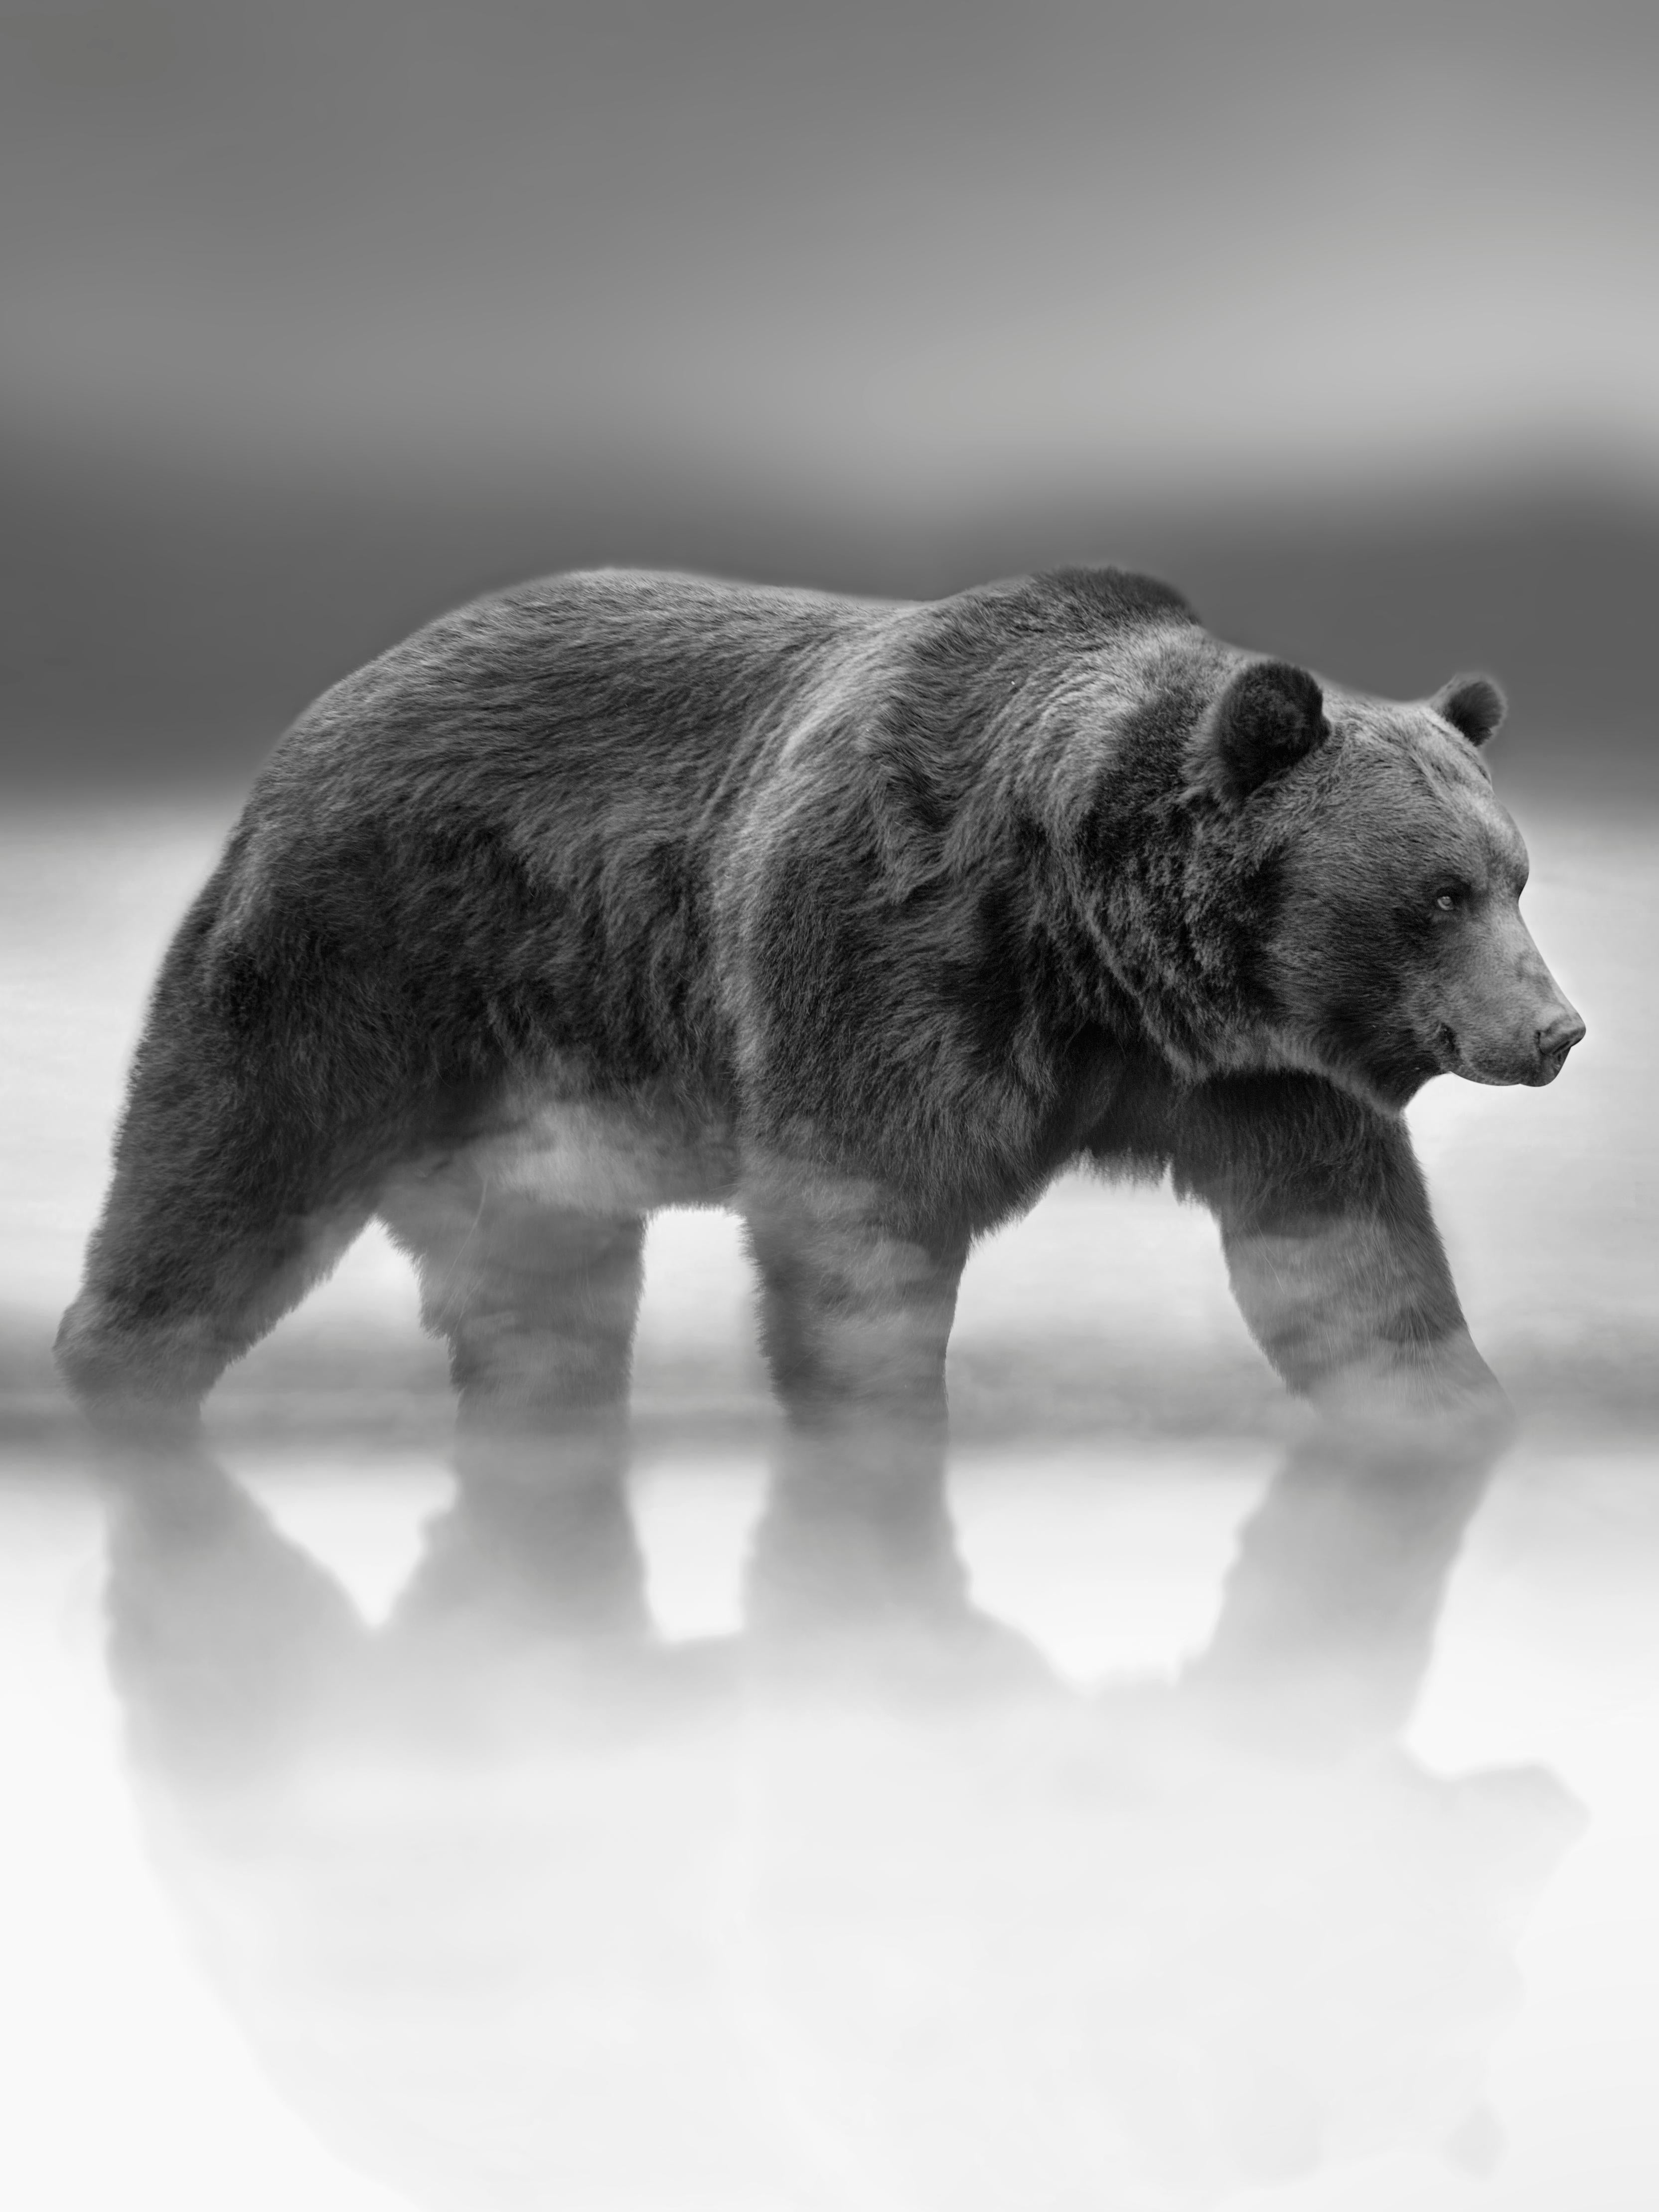 Shane Russeck Black and White Photograph - Kodiak Island 50x60 Black & White Photography, Kodiak Bear Grizzly Brown Bear 